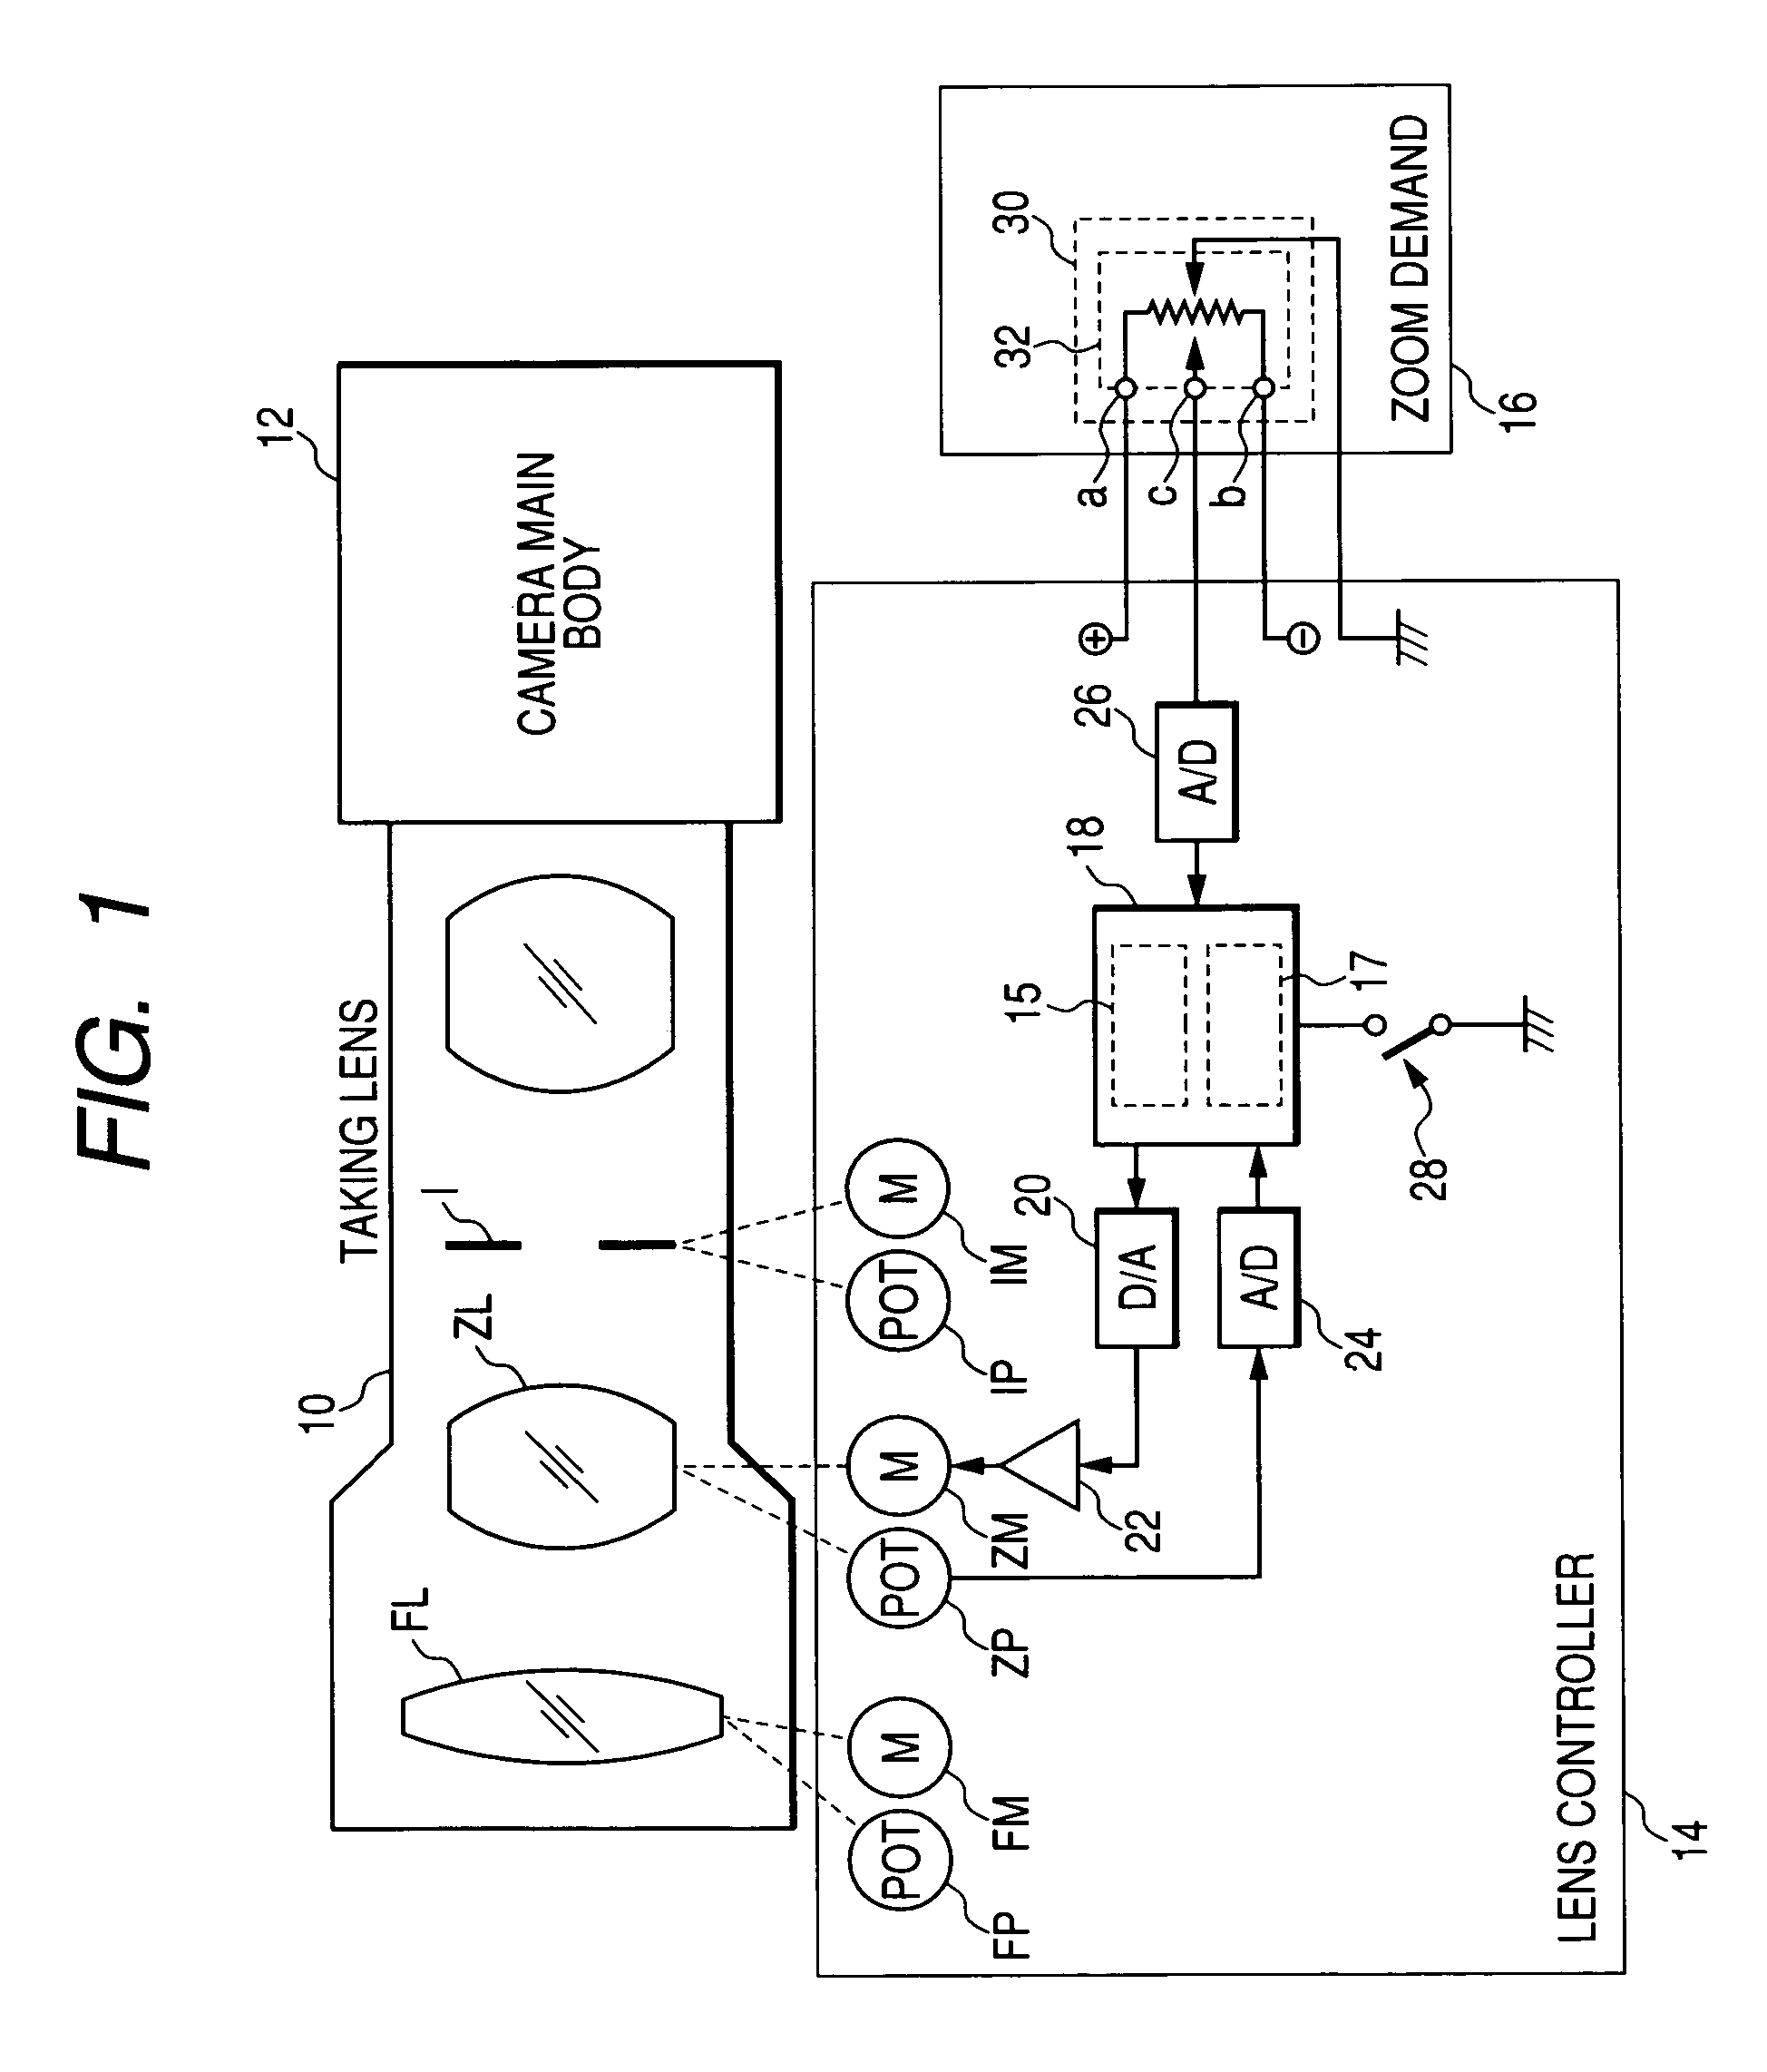 Lens control system, lens controller, and operating apparatus